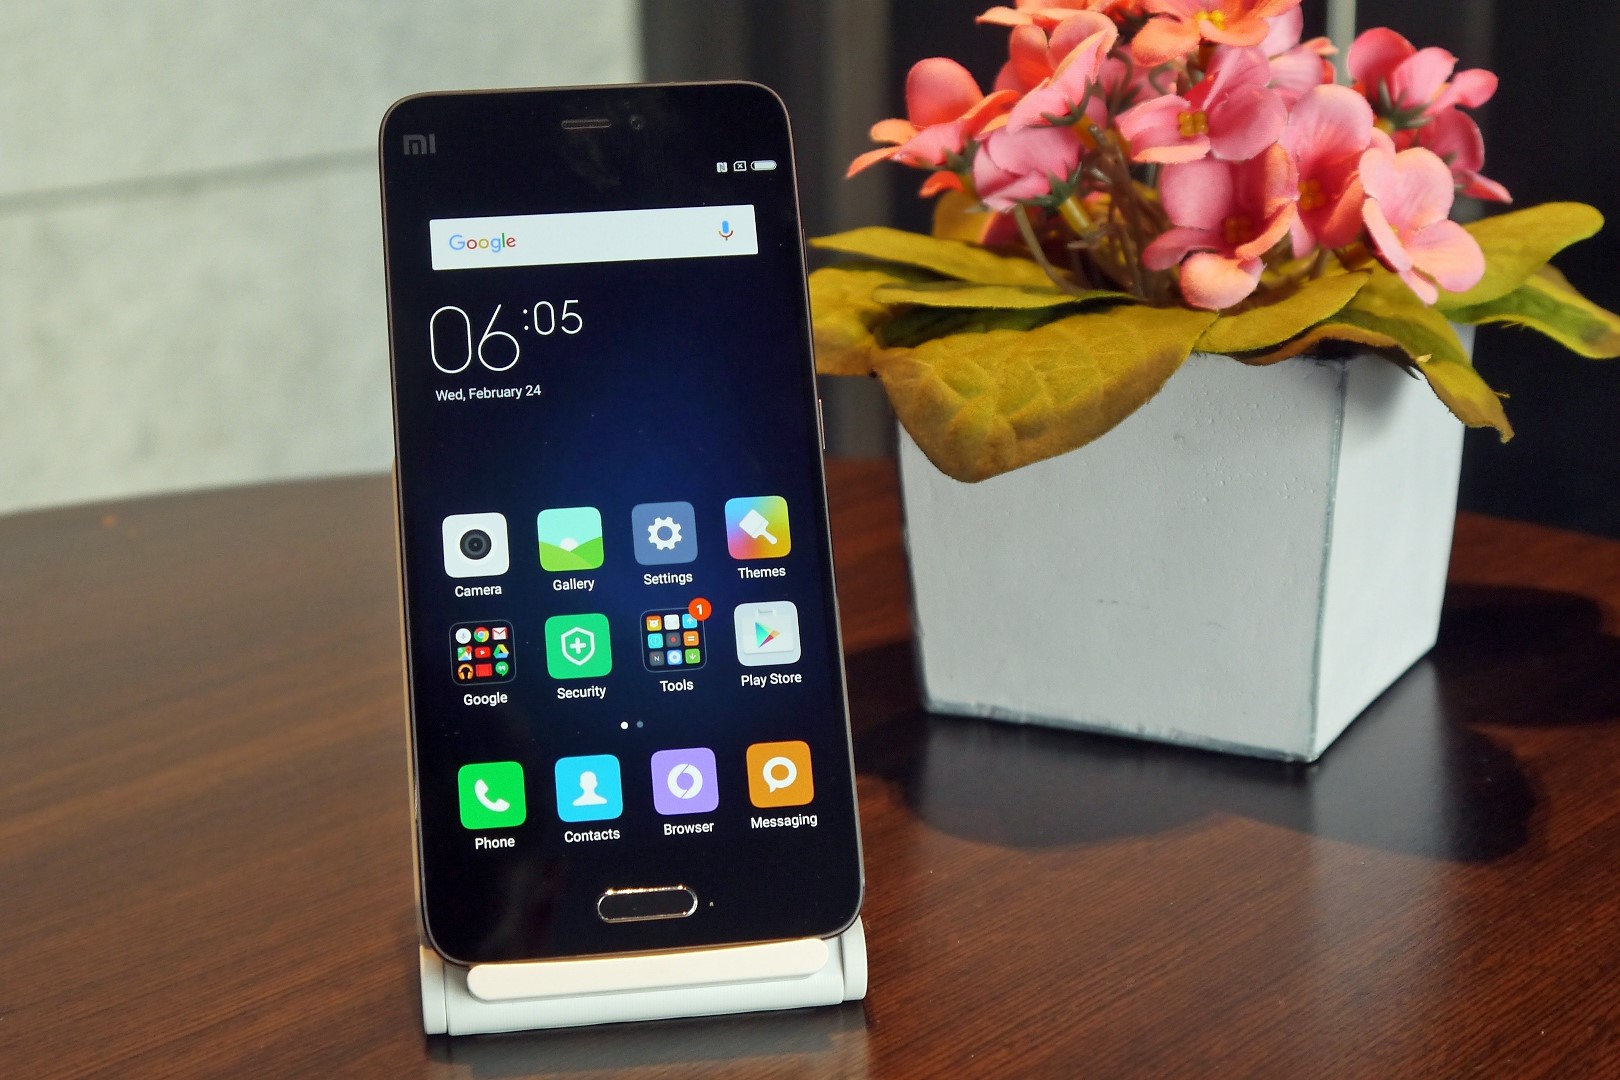 Booting Xiaomi Mi5: Step-by-Step Instructions